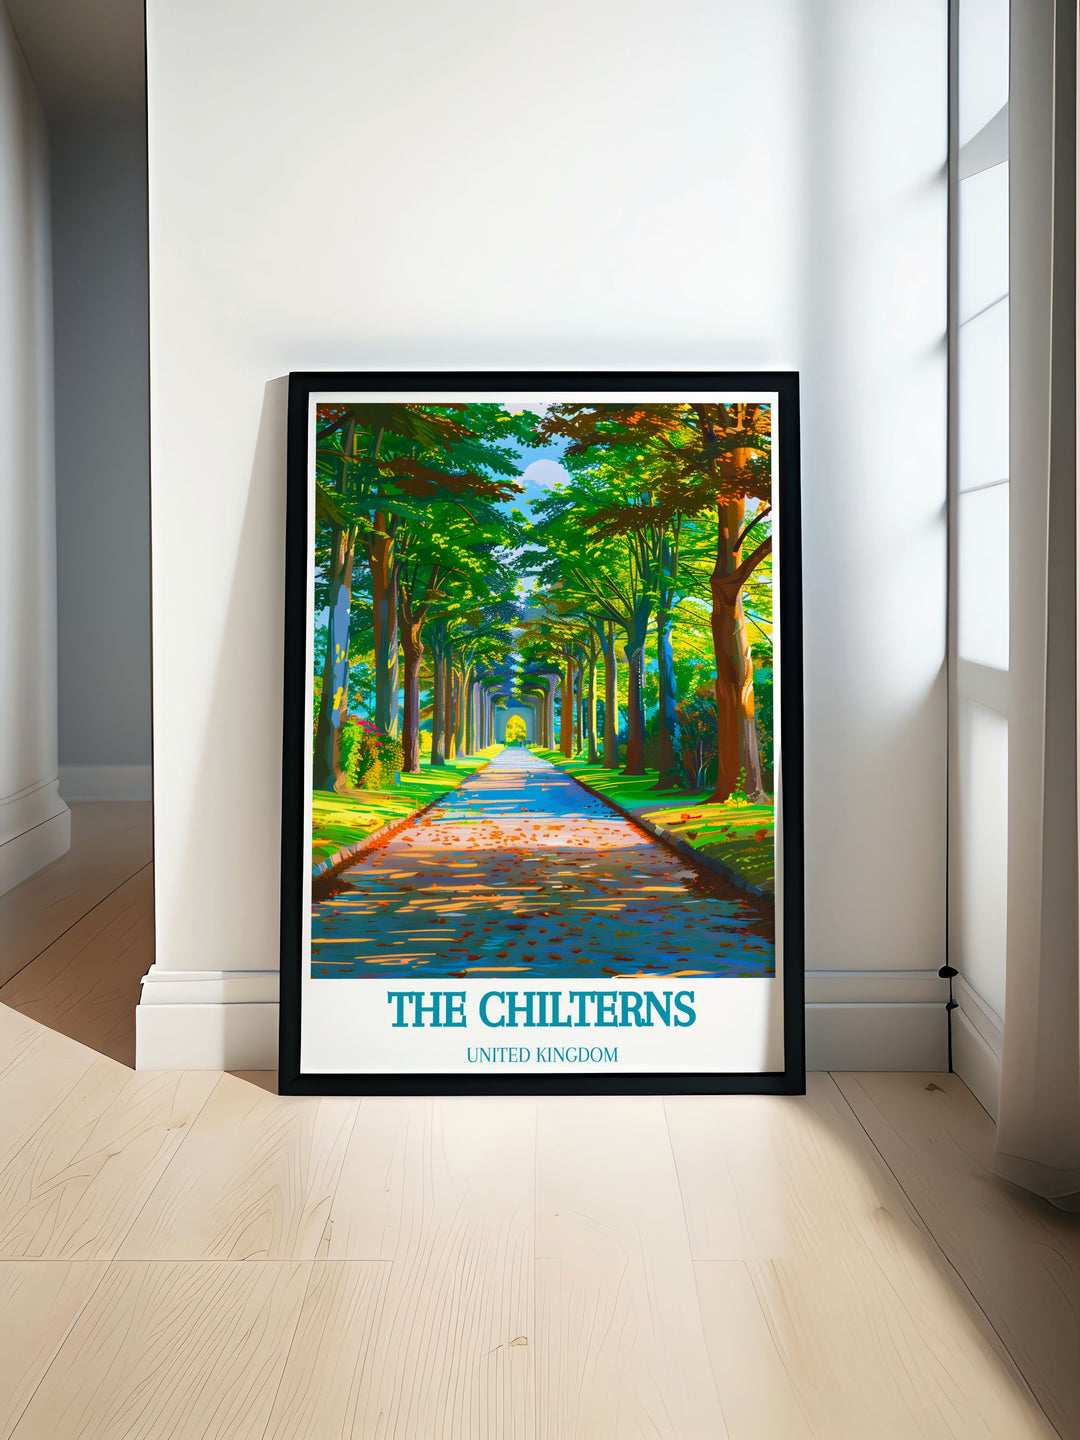 Whipsnade Tree Cathedral Modern Wall Decor capturing the unique landmark with intricate design and serene atmosphere, showcasing the lush greenery and peaceful setting of this stunning location in The Chilterns.